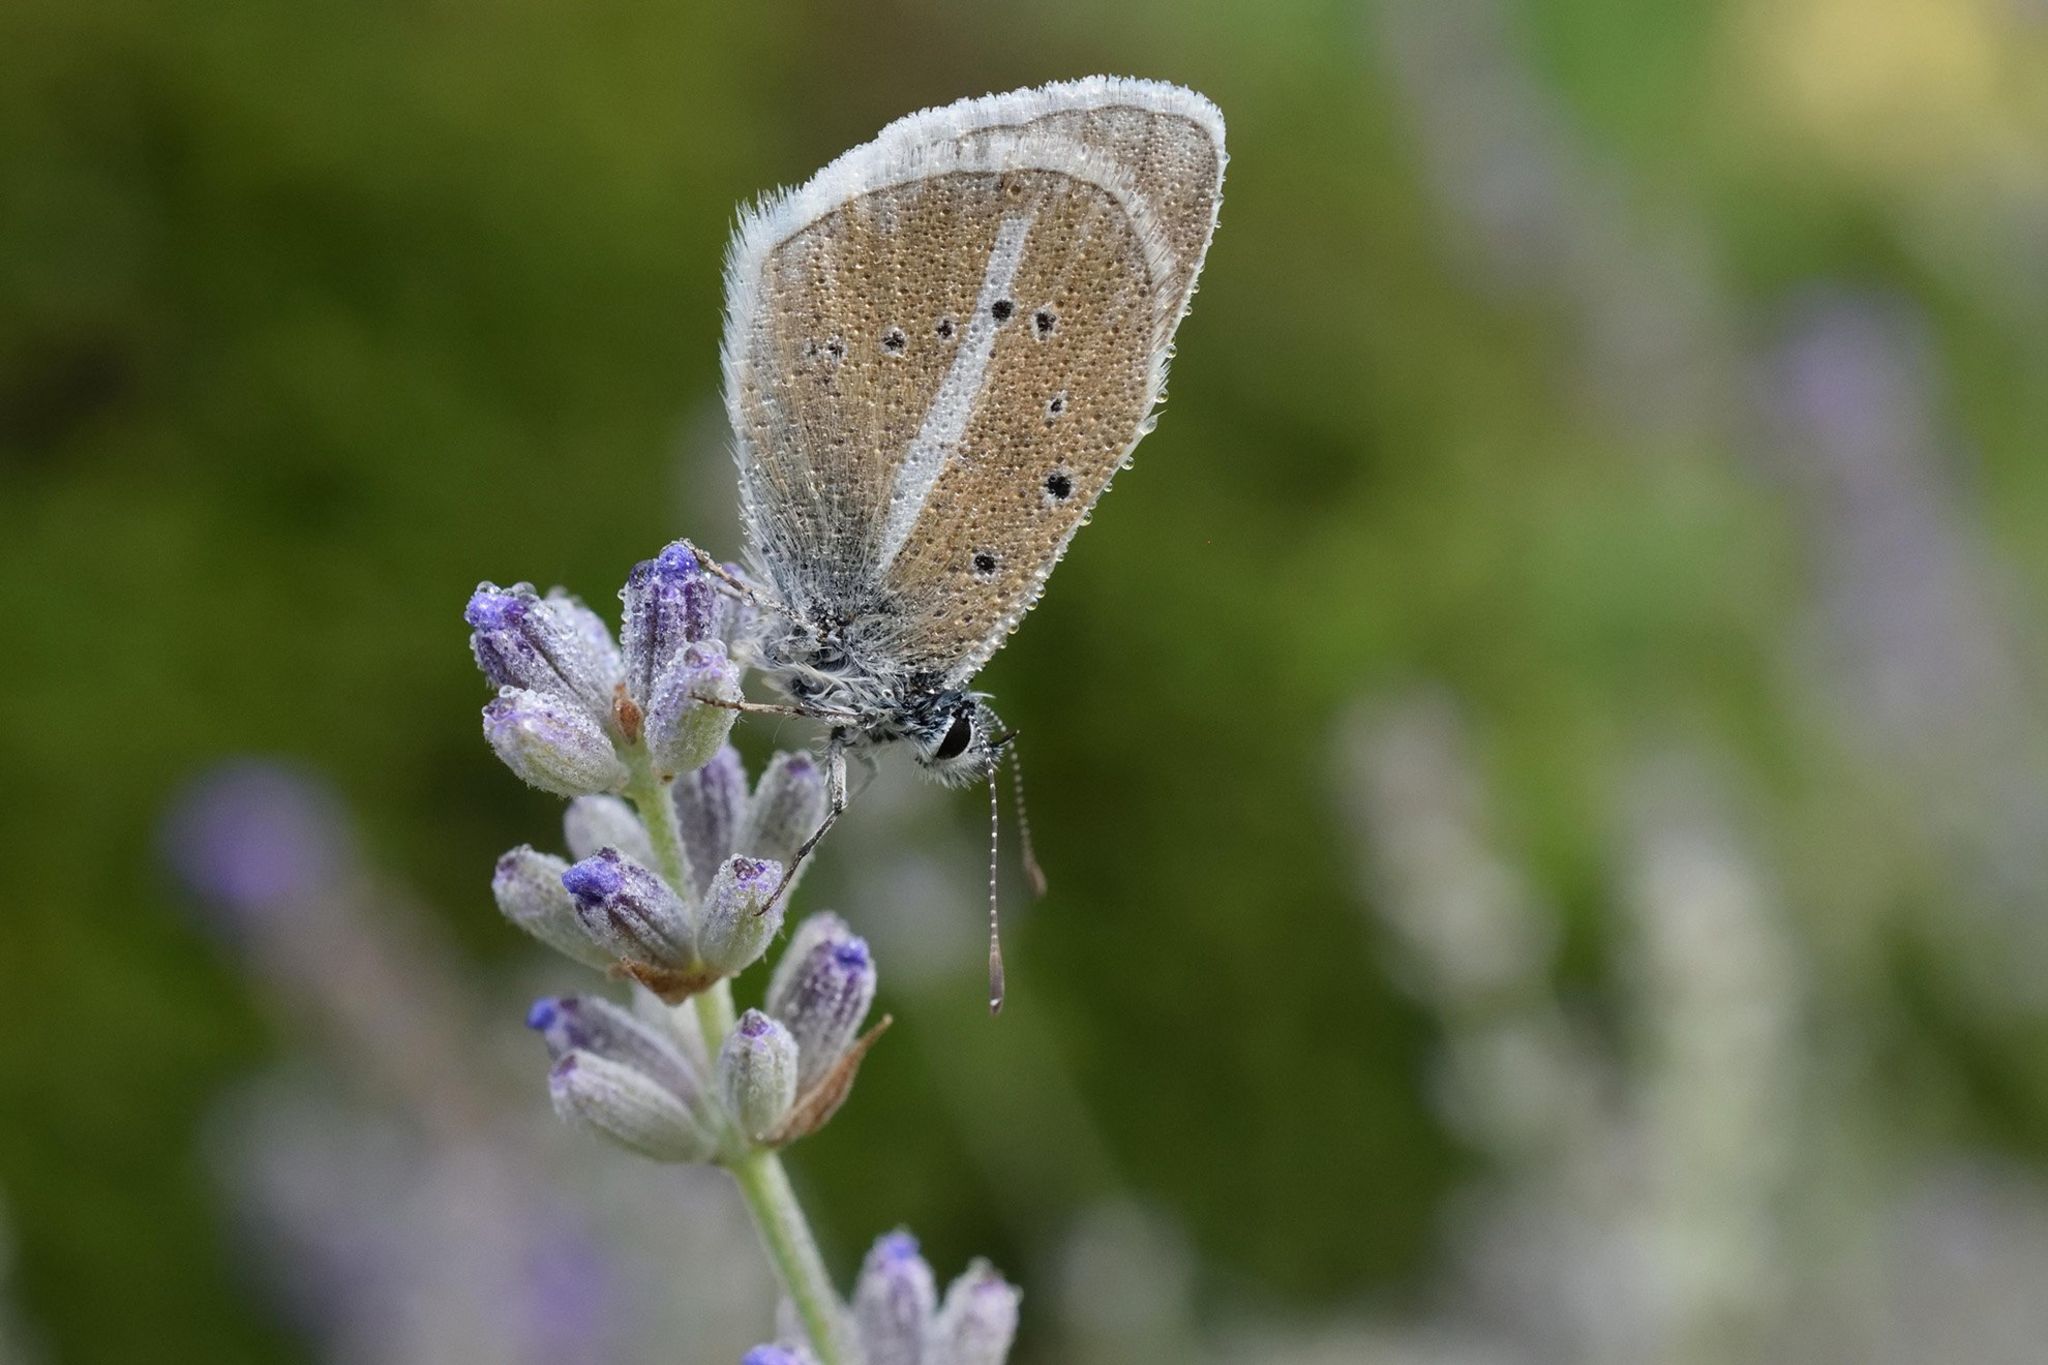 A Damon Blue butterfly resting on a stalk with purple petals